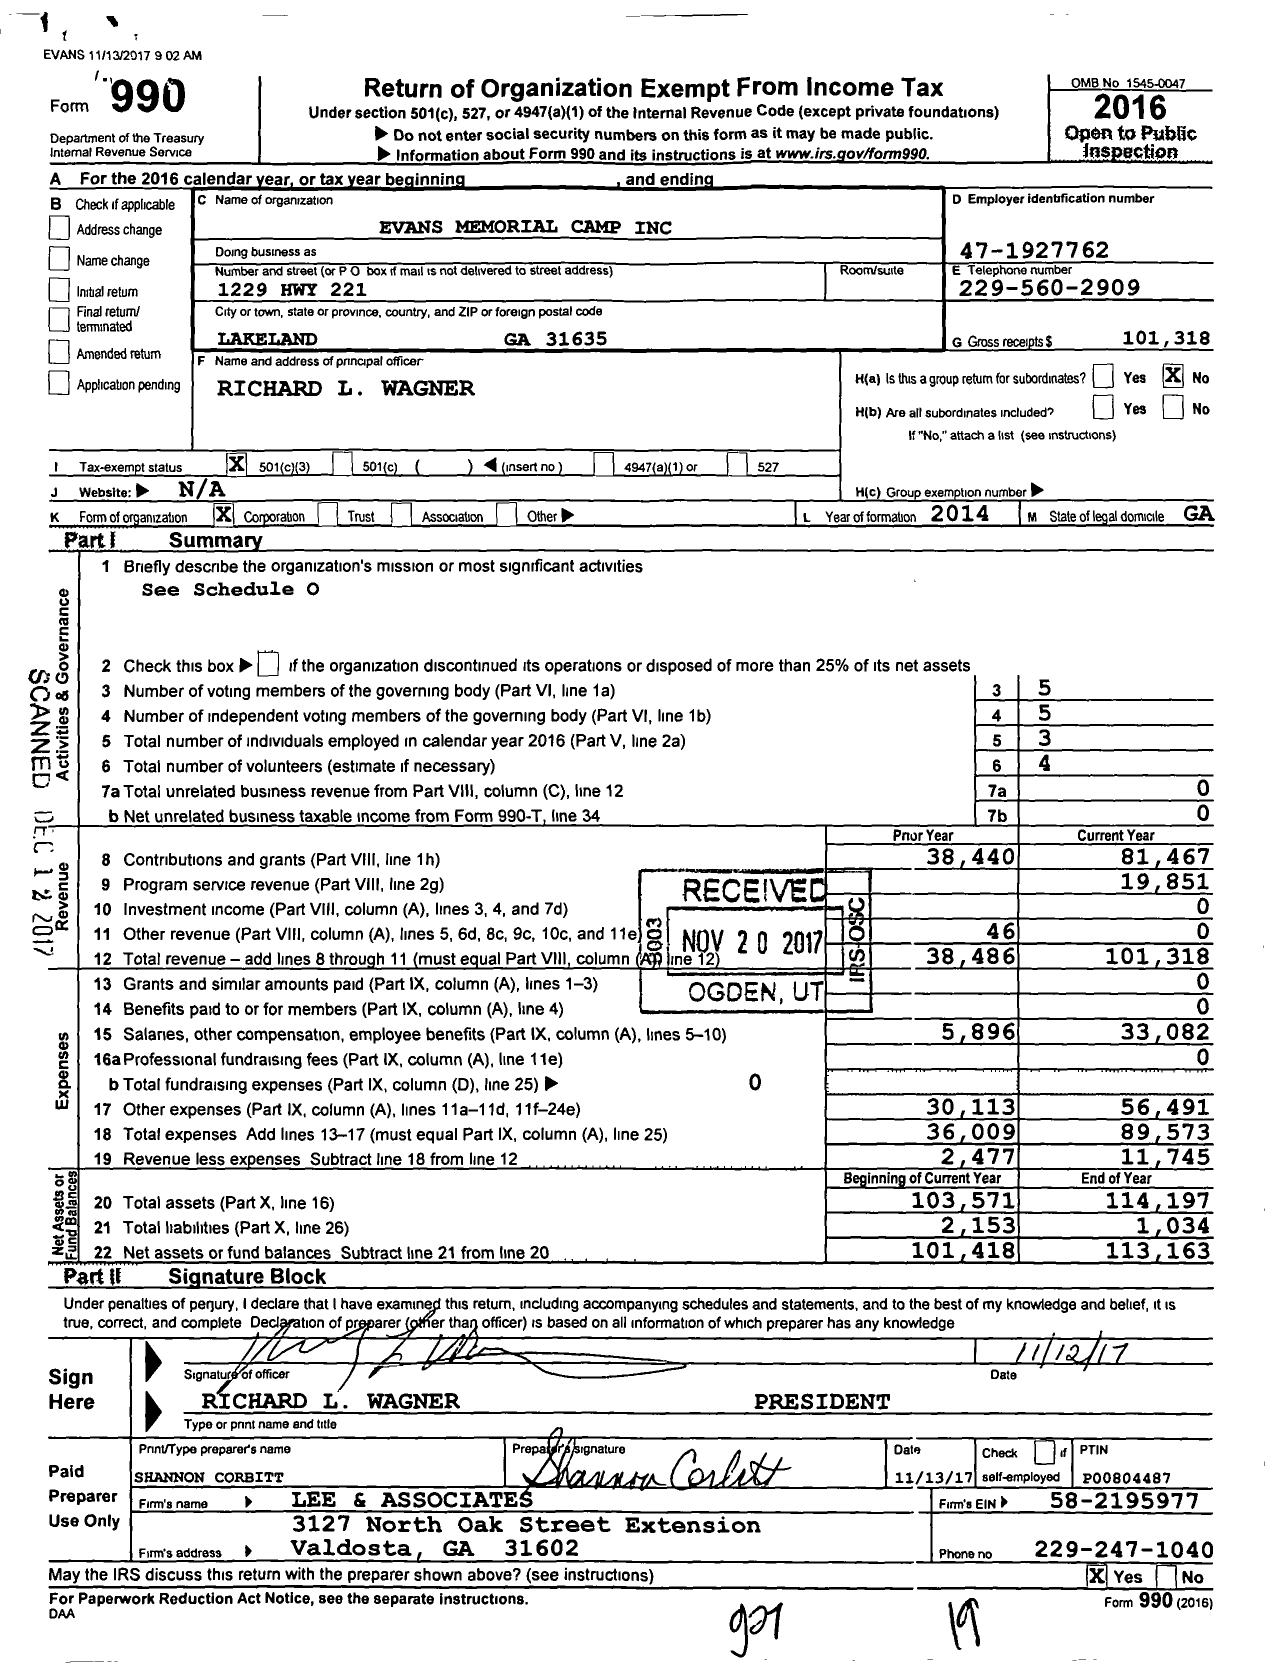 Image of first page of 2016 Form 990 for Evans Memorial Camp